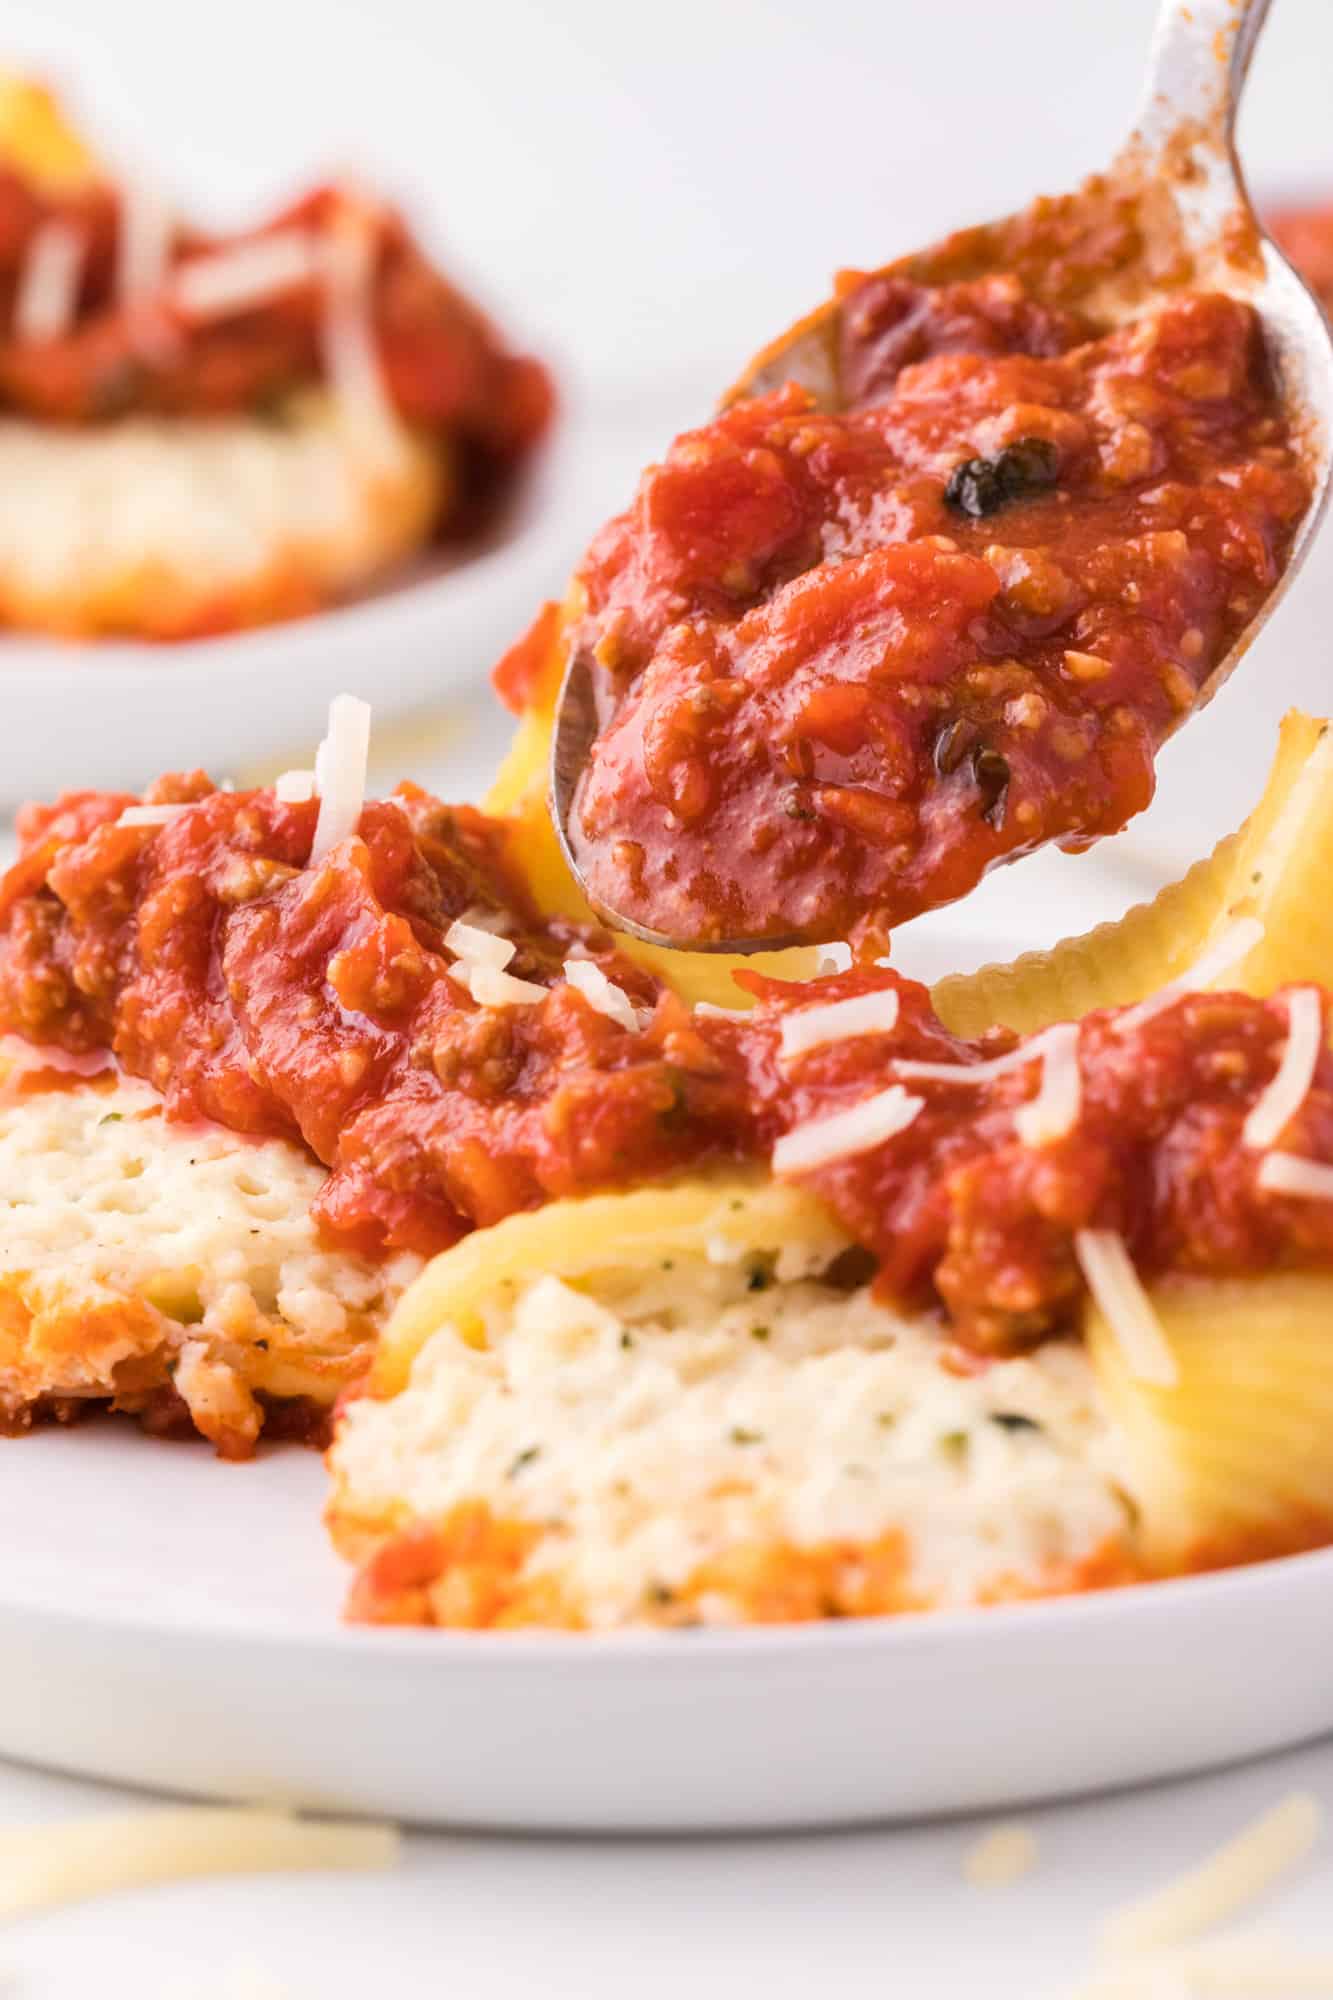 Meat sauce being spooned over cheese stuffed shells.